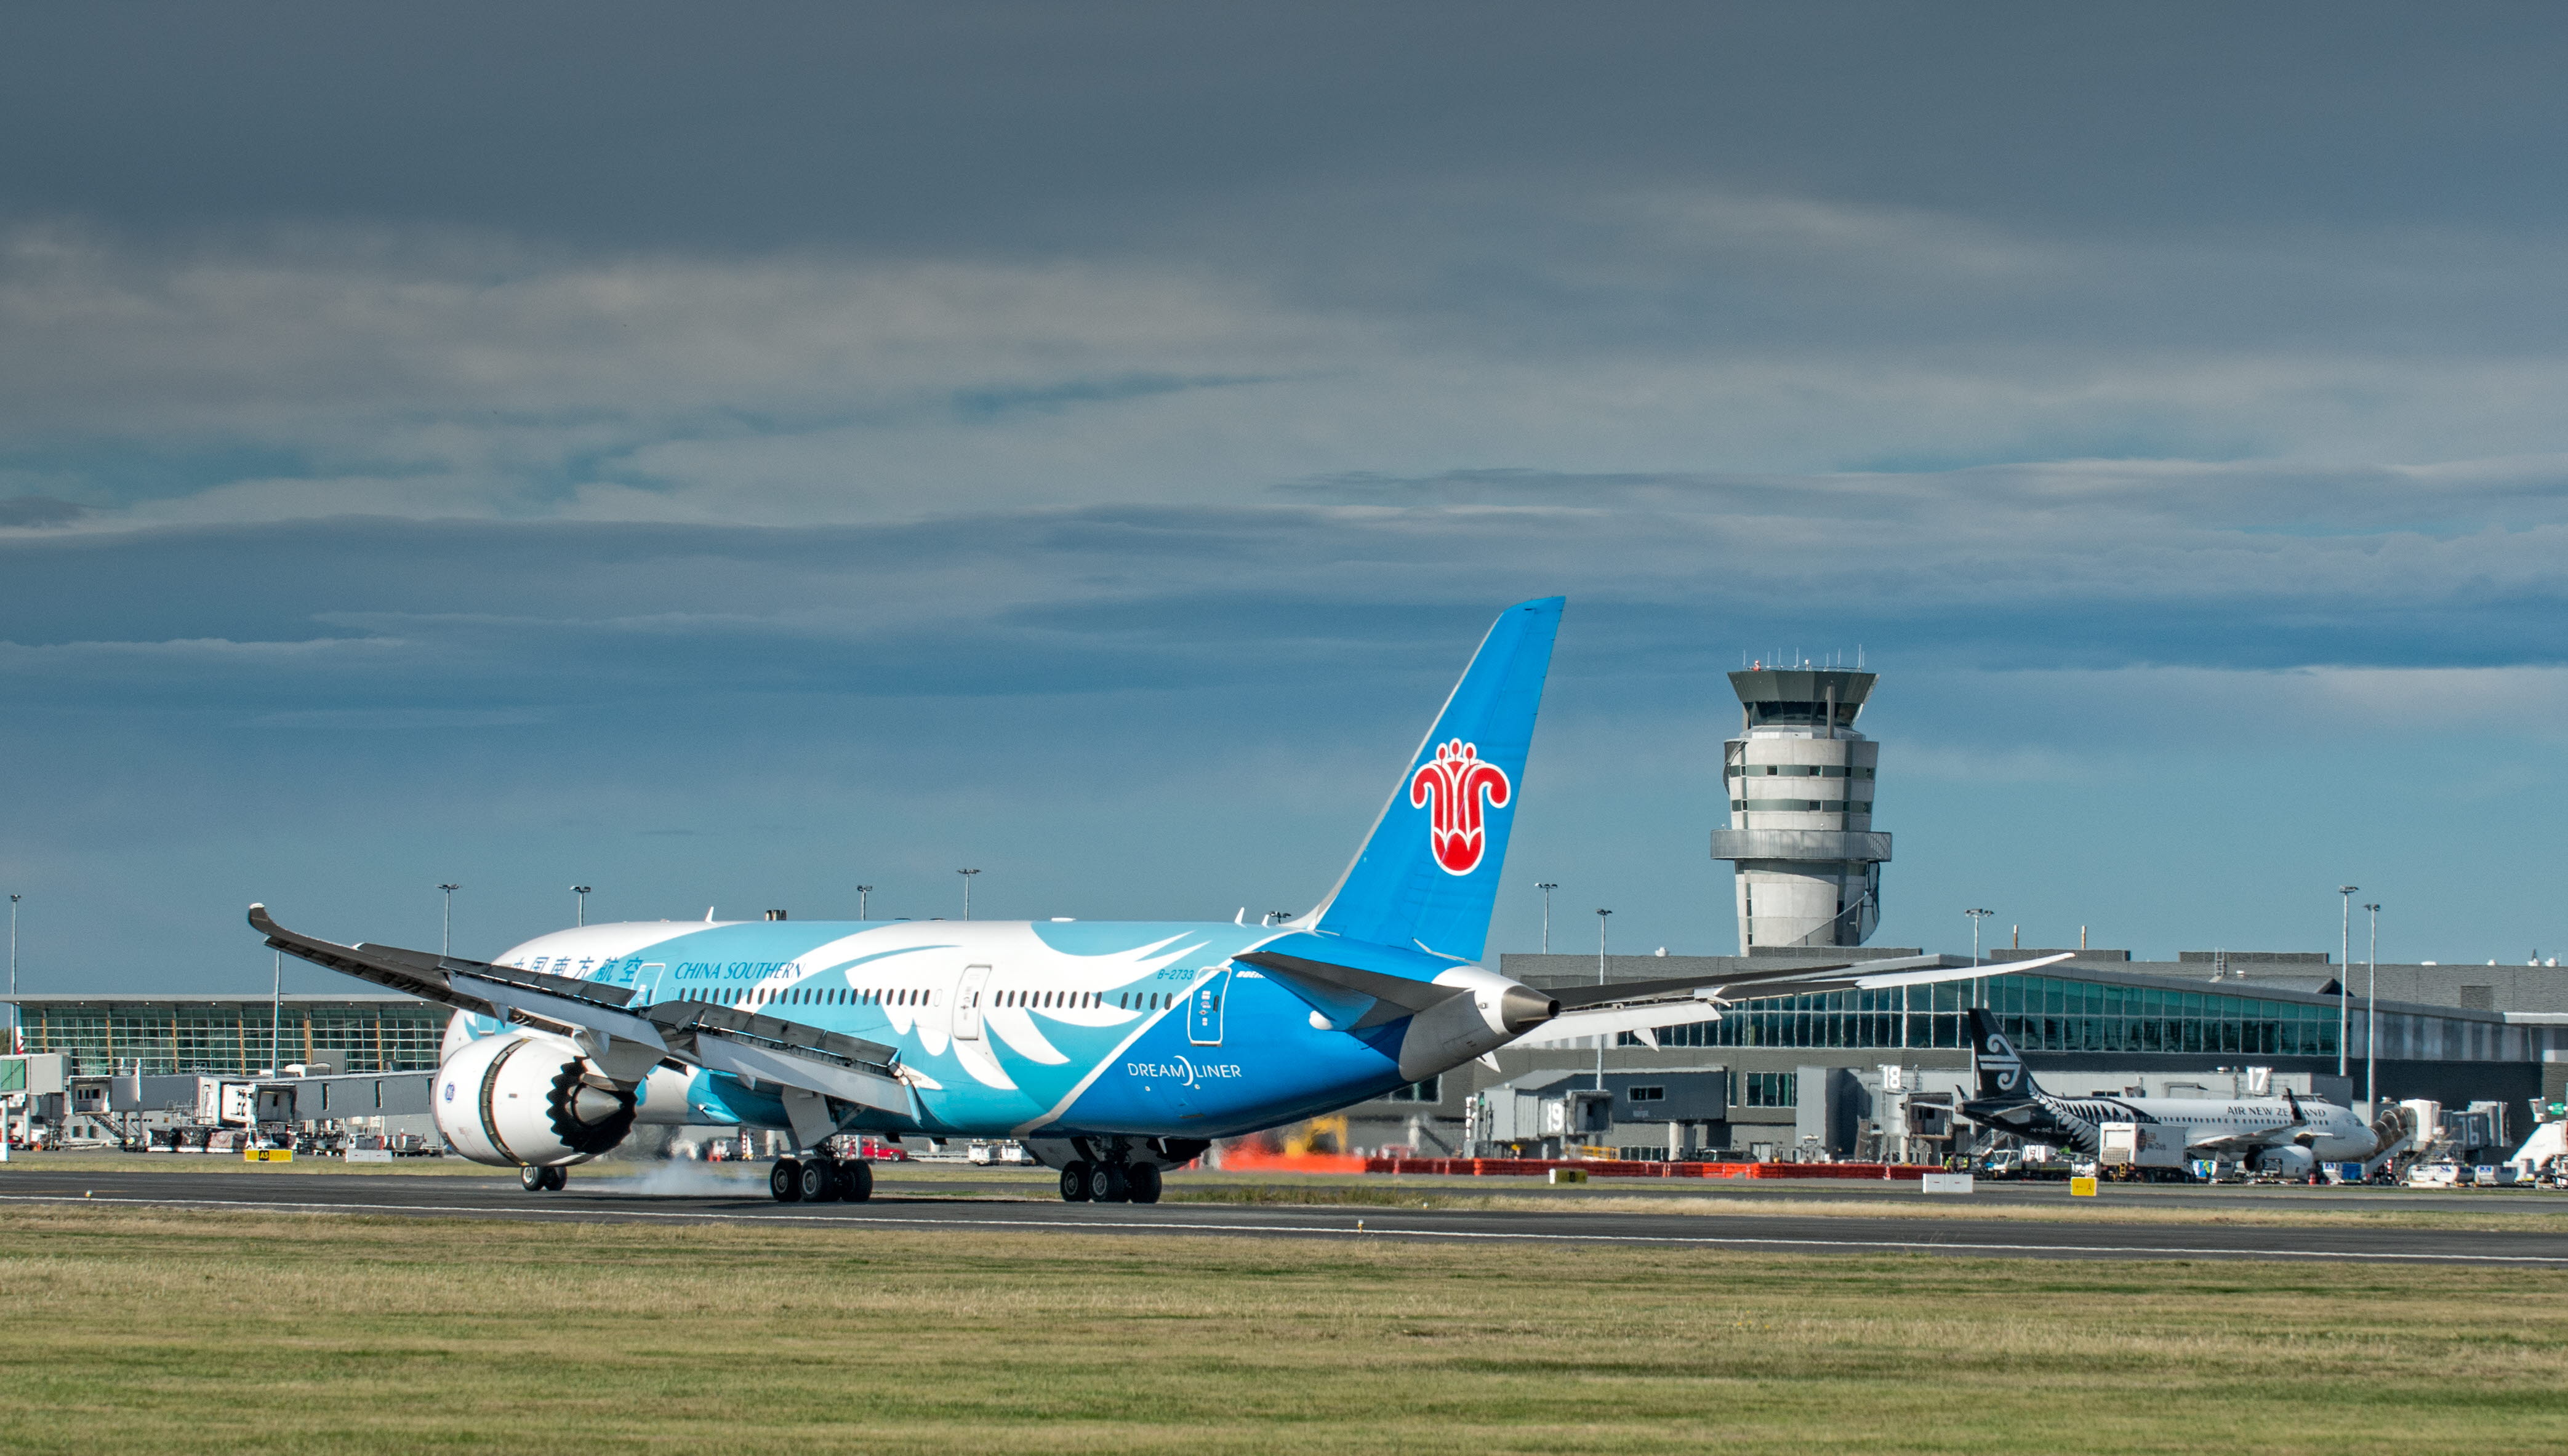 Domestic-China Southern Airlines Co. Ltd